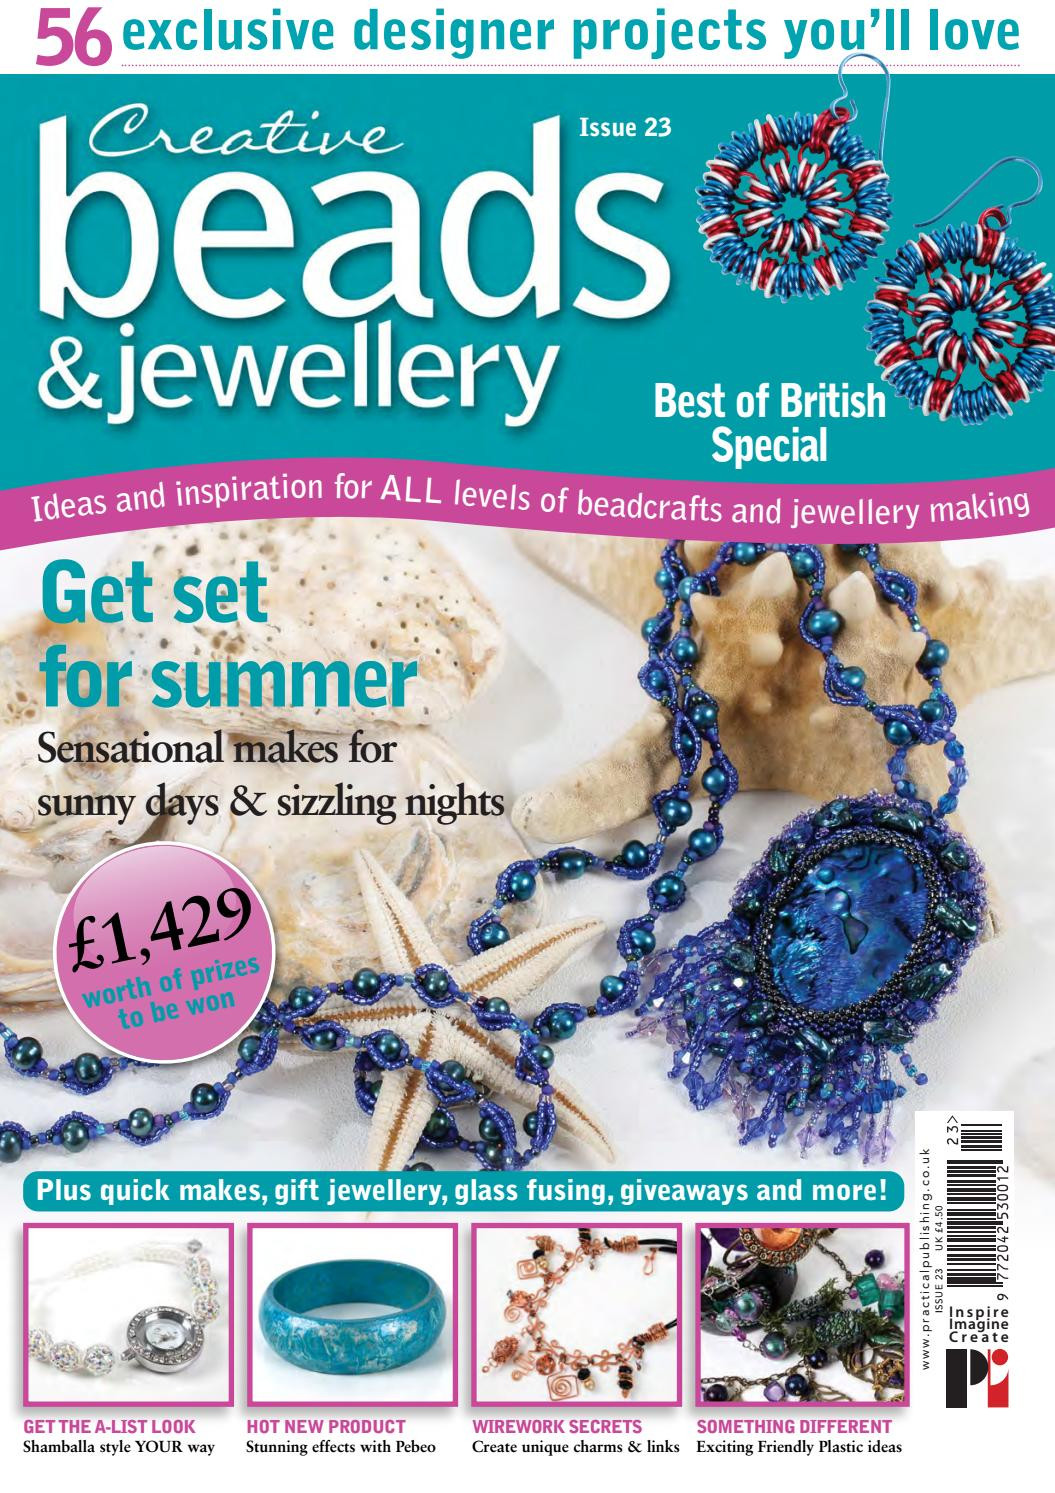 22 Elegant Decorative Glass Beads for Vases Uk 2024 free download decorative glass beads for vases uk of creative beads and jewellery 23 by practical publishing issuu with regard to page 1